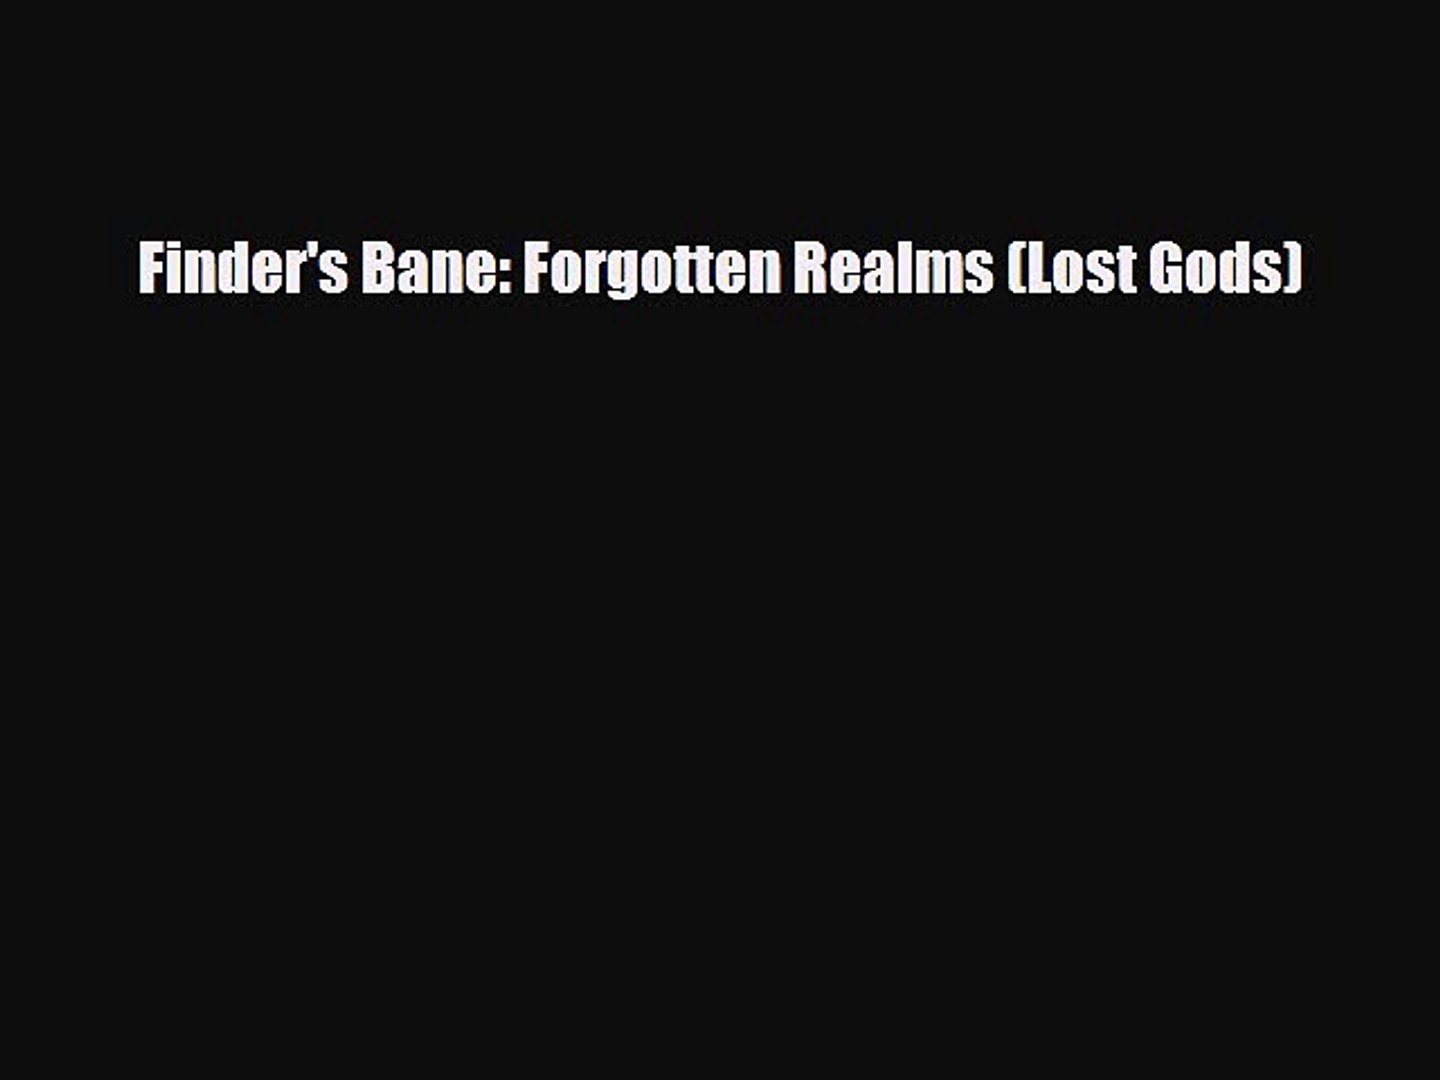 Pdf Download Finder S Bane Forgotten Realms Lost Gods Download Full Ebook Video Dailymotion